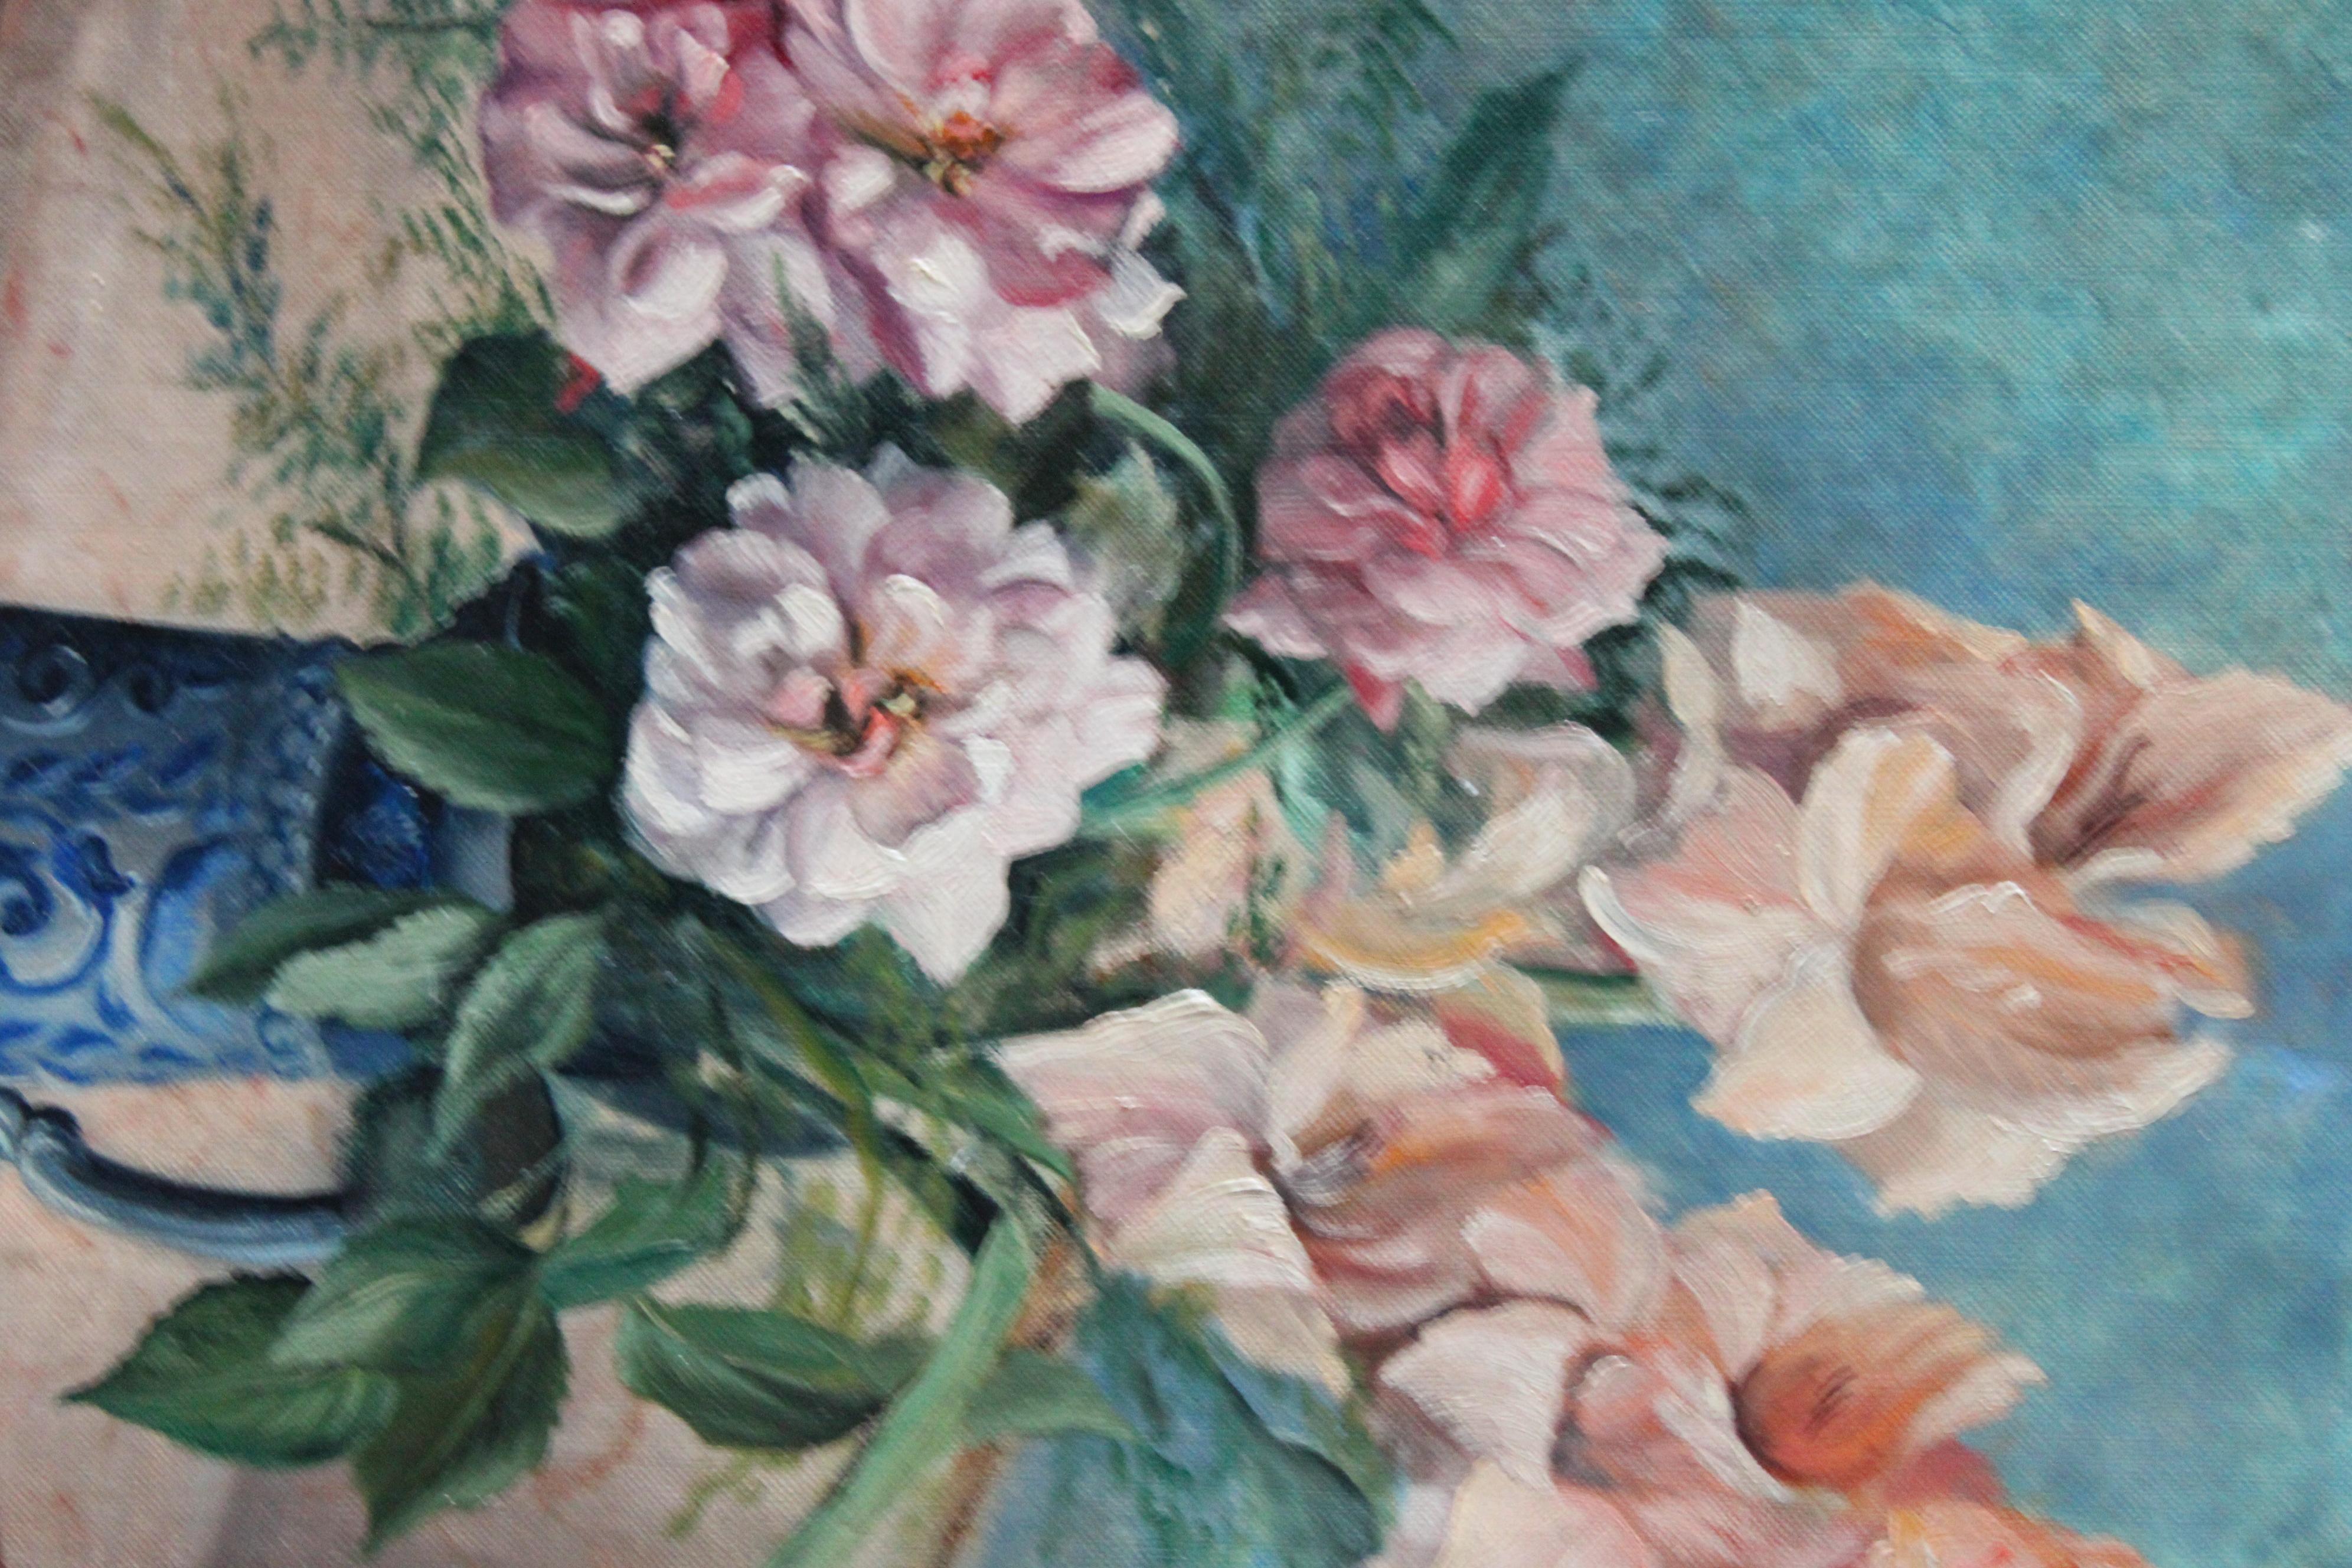 Vintage still life oil painting, floral interior painting, pink flower bouquet 6